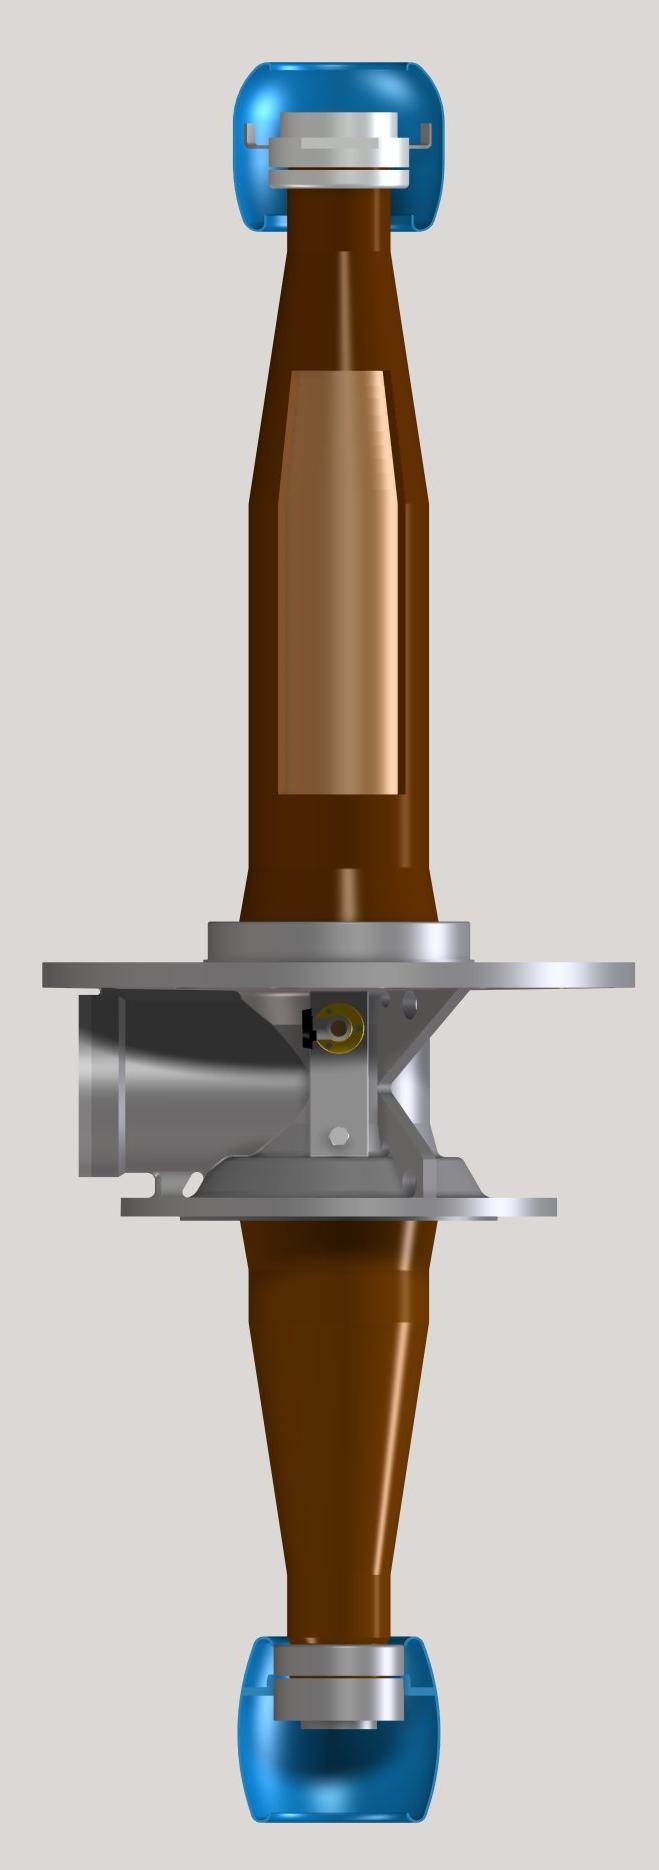 Oil / SF6 Bushing Design 1 2 SF6 side Shield (on request) SF6 side Terminal Terminal (Al or Cu) for connection is designed according standard IEC 1639.